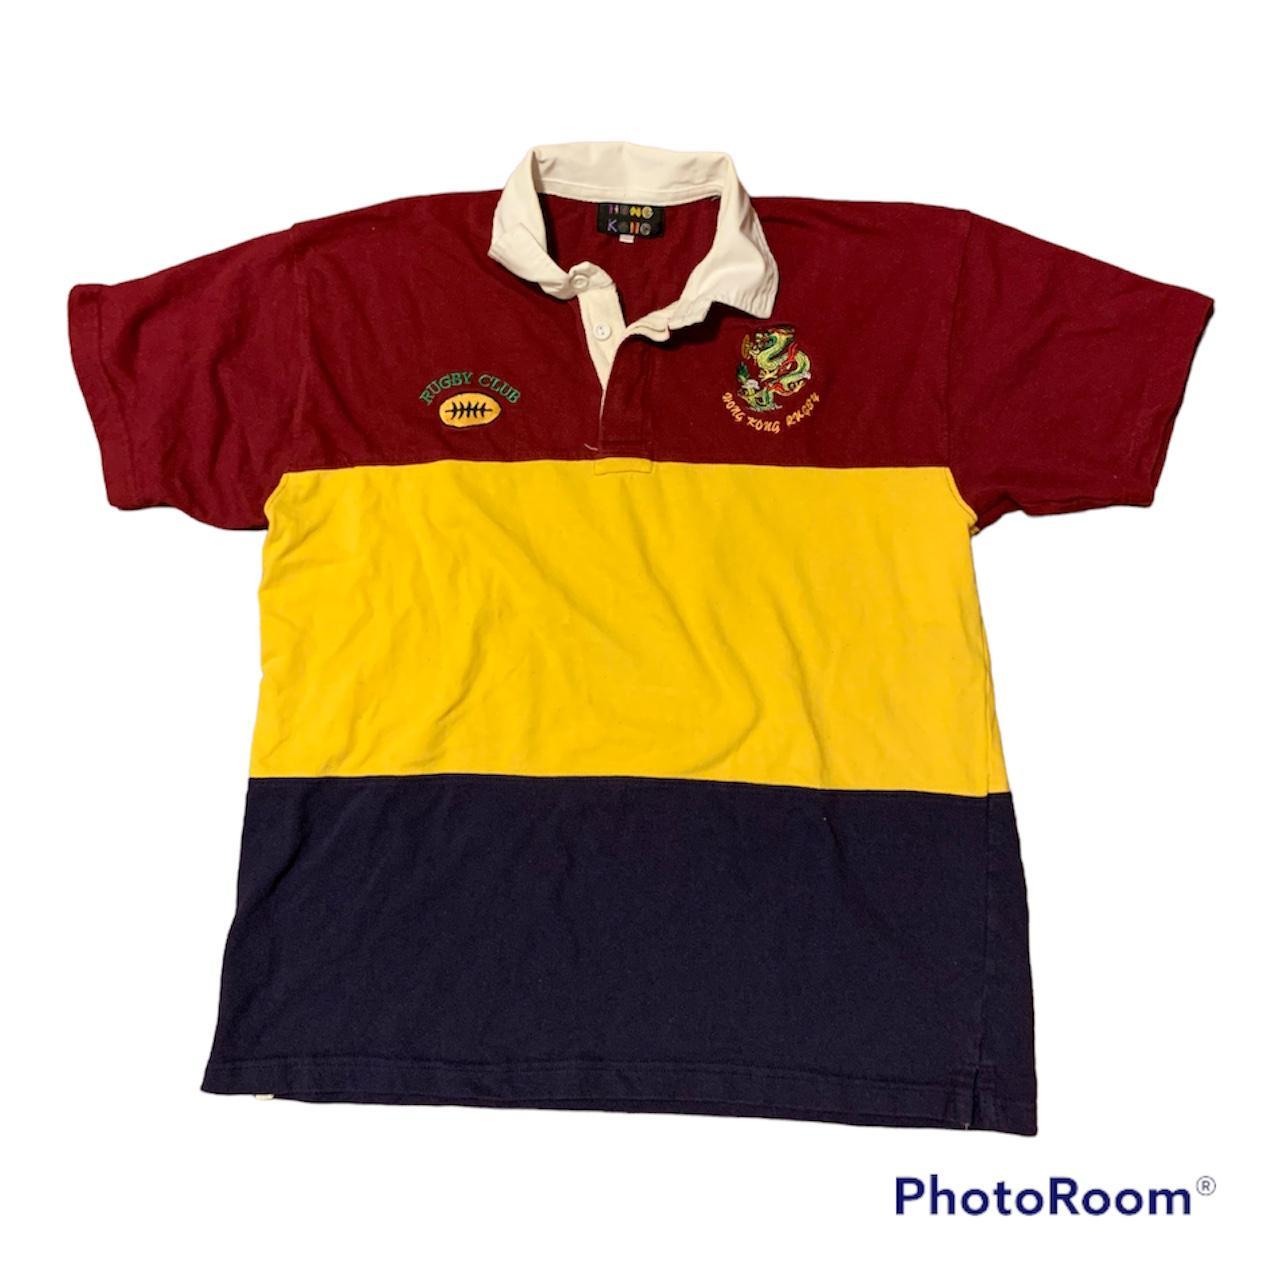 American Vintage Men's Yellow and Burgundy Polo-shirts